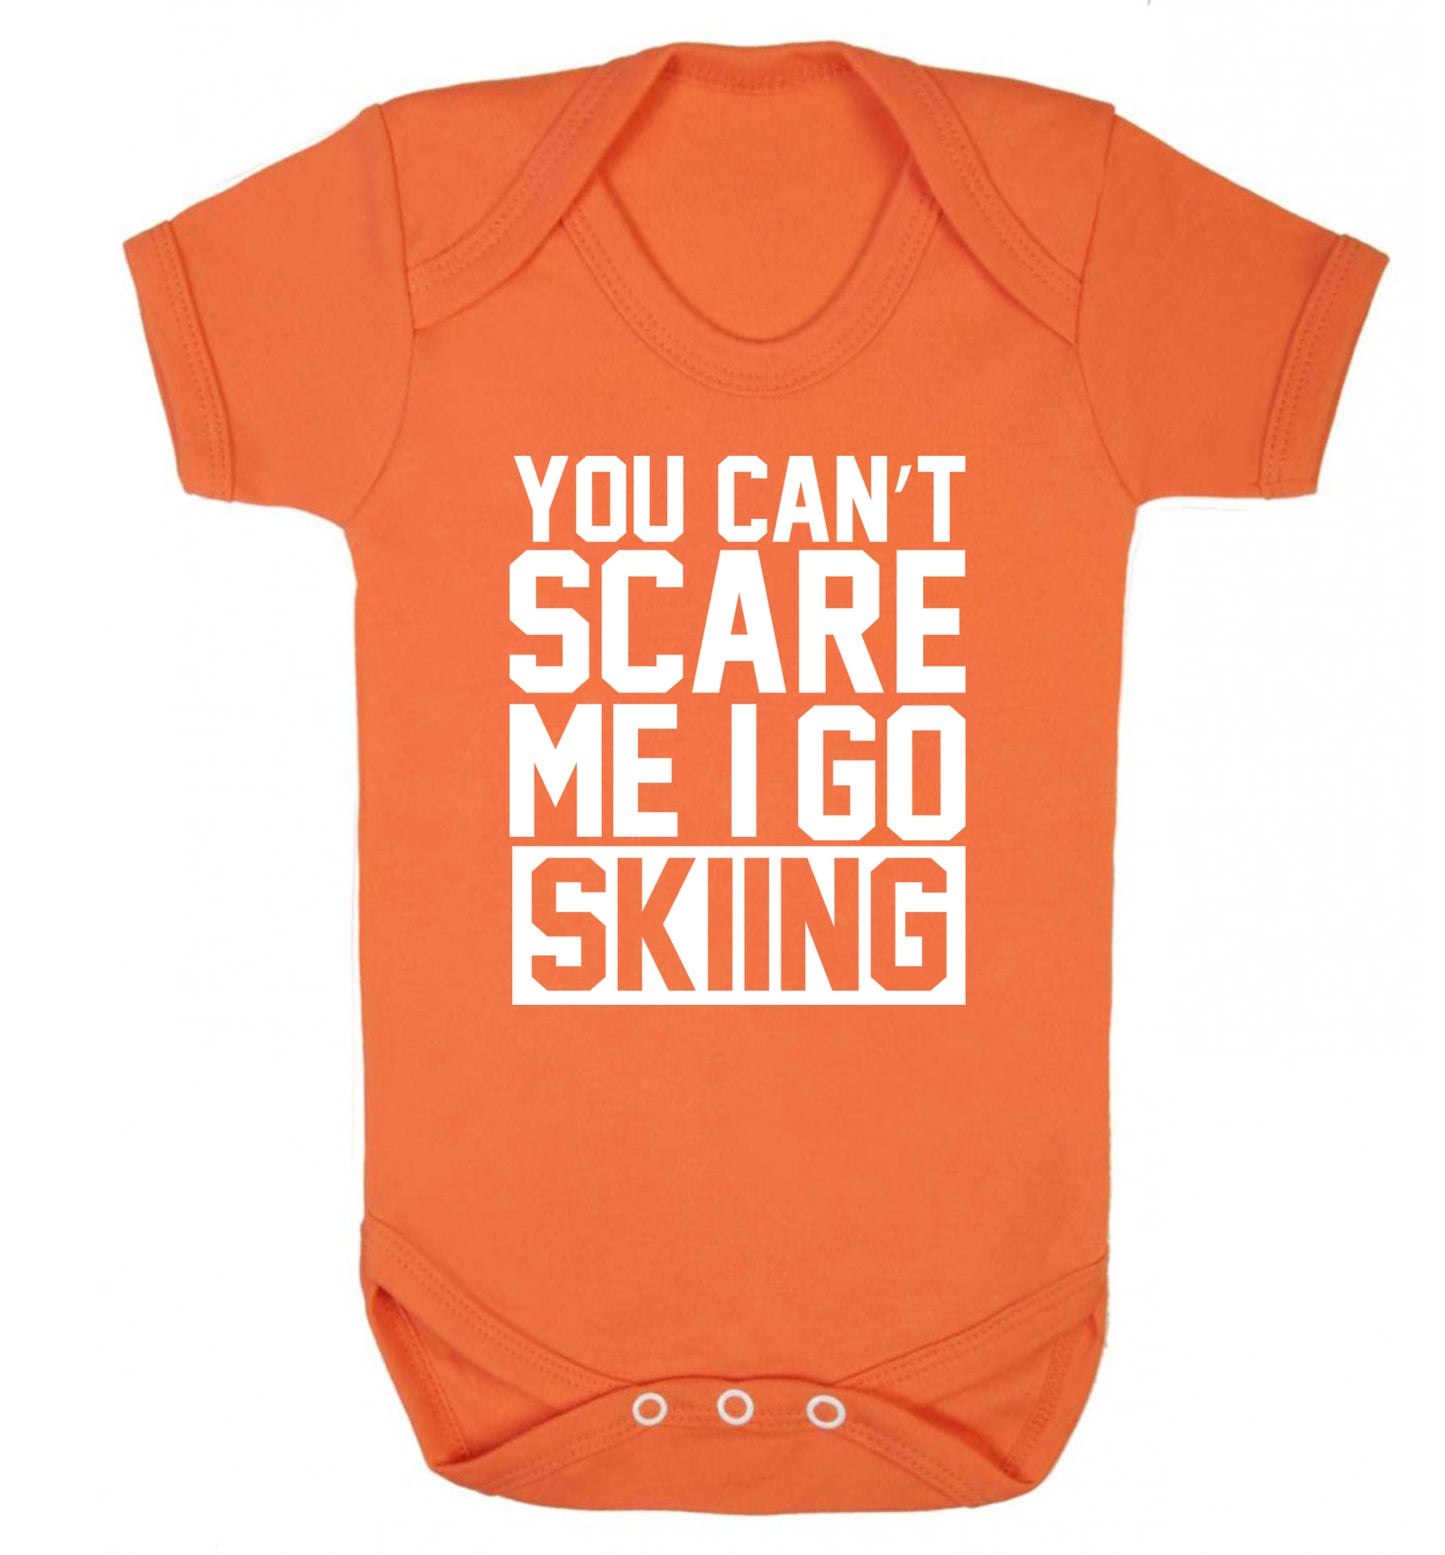 You can't scare me I go skiing Baby Vest orange 18-24 months